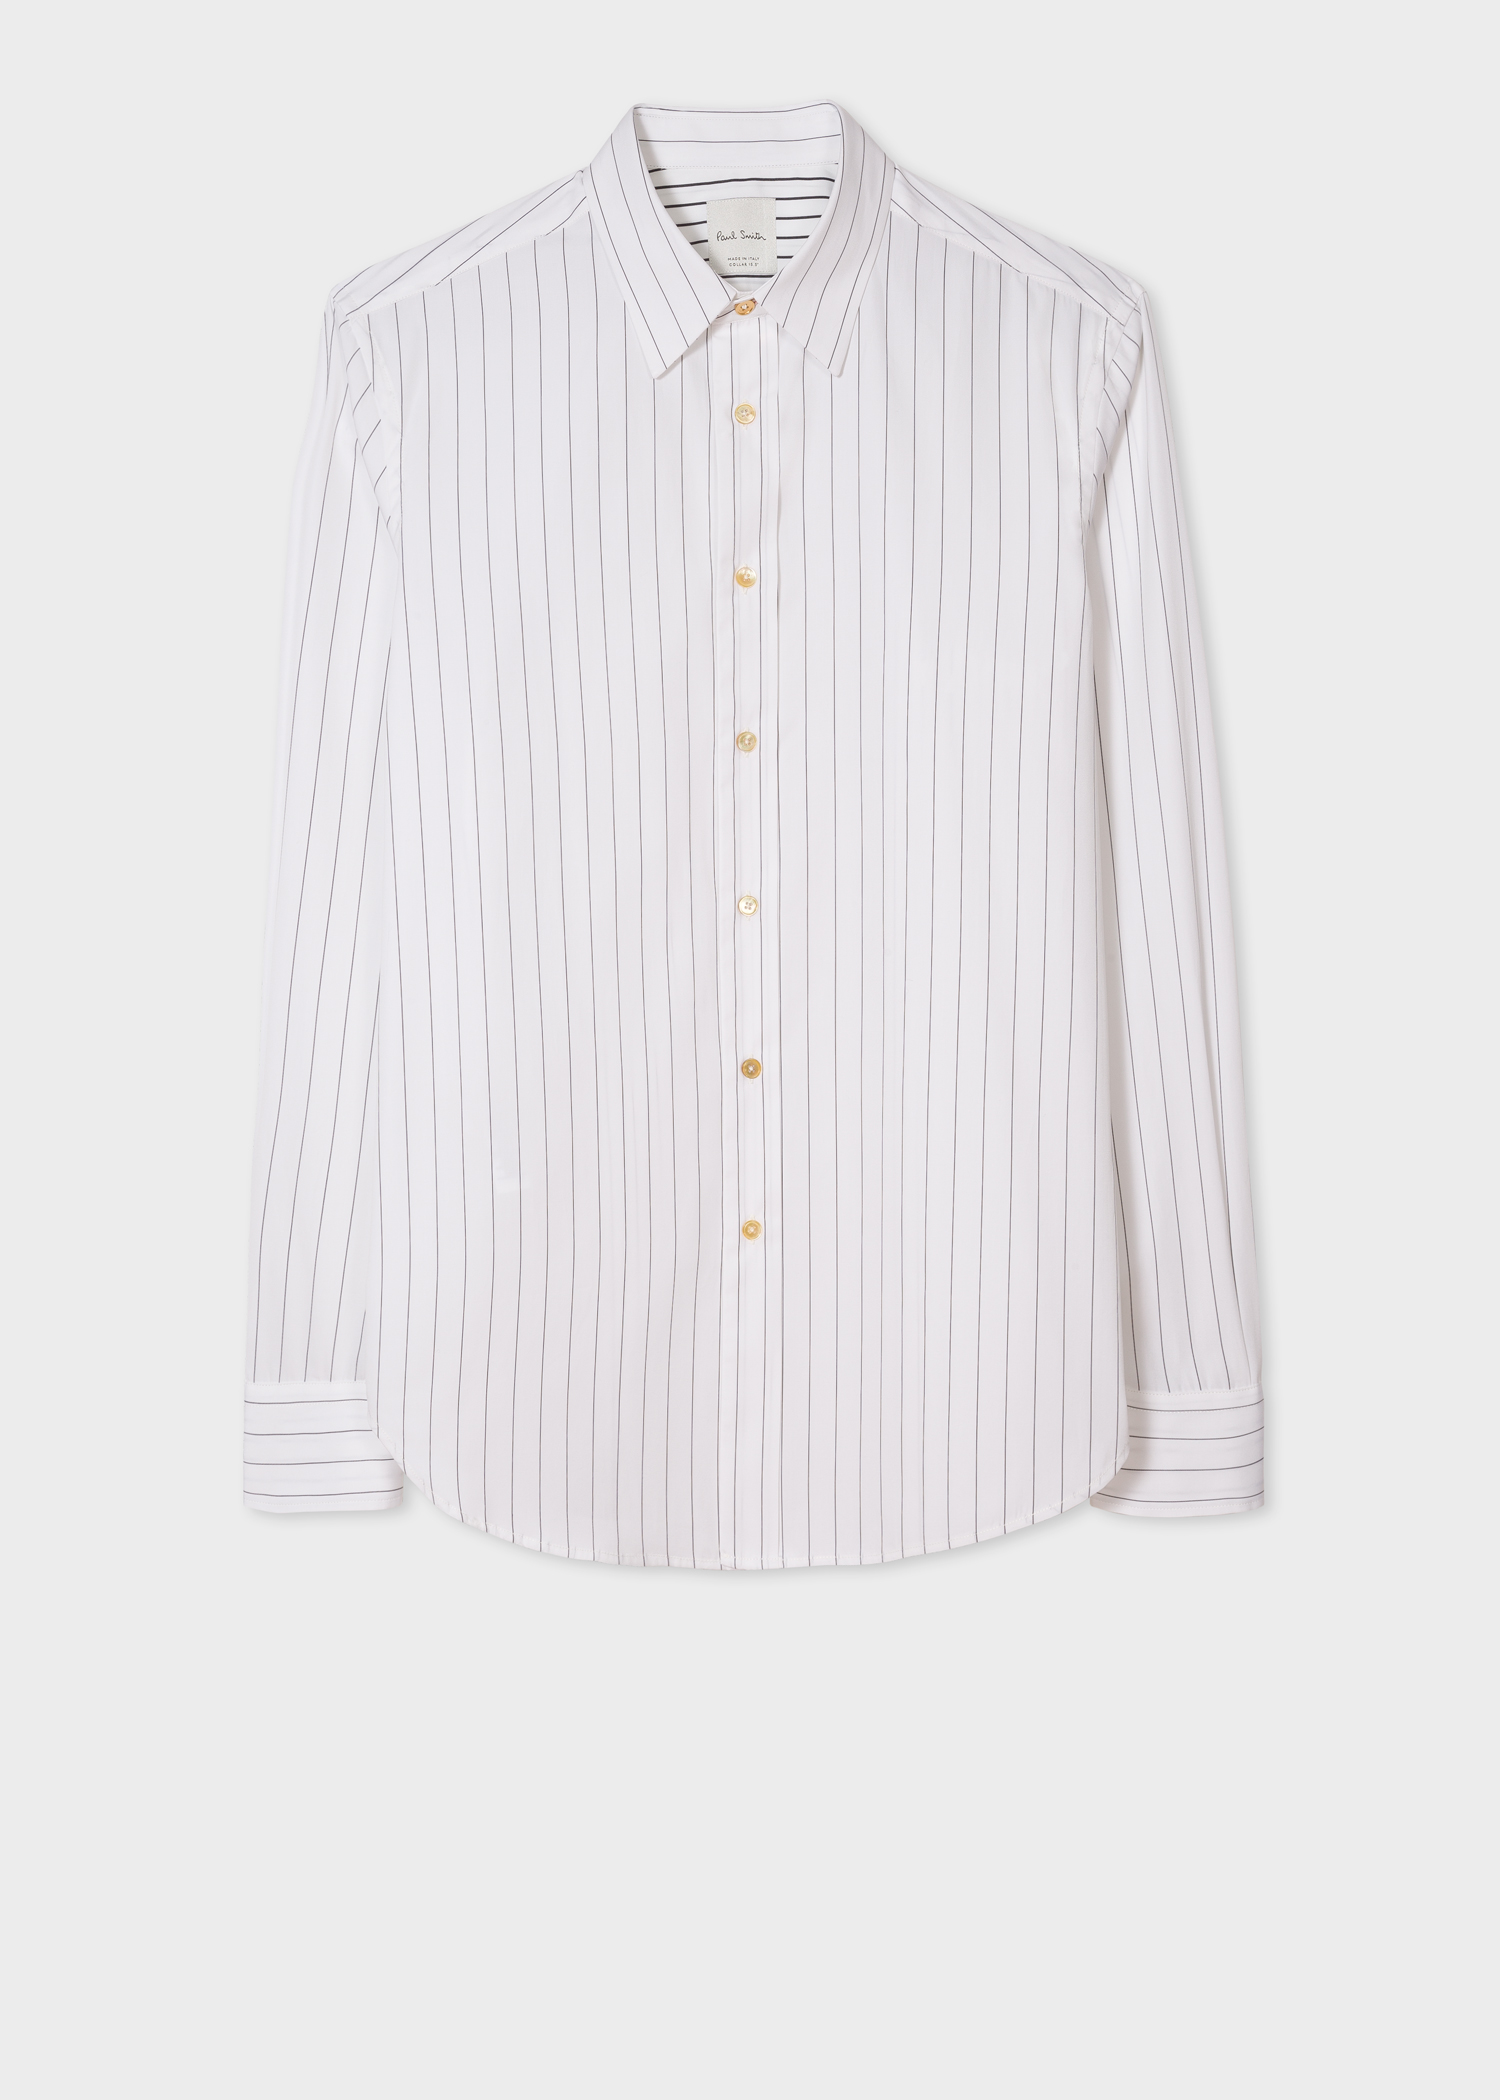 Front view - Men's Tailored-Fit Pin Stripe Cotton Shirt Paul Smith